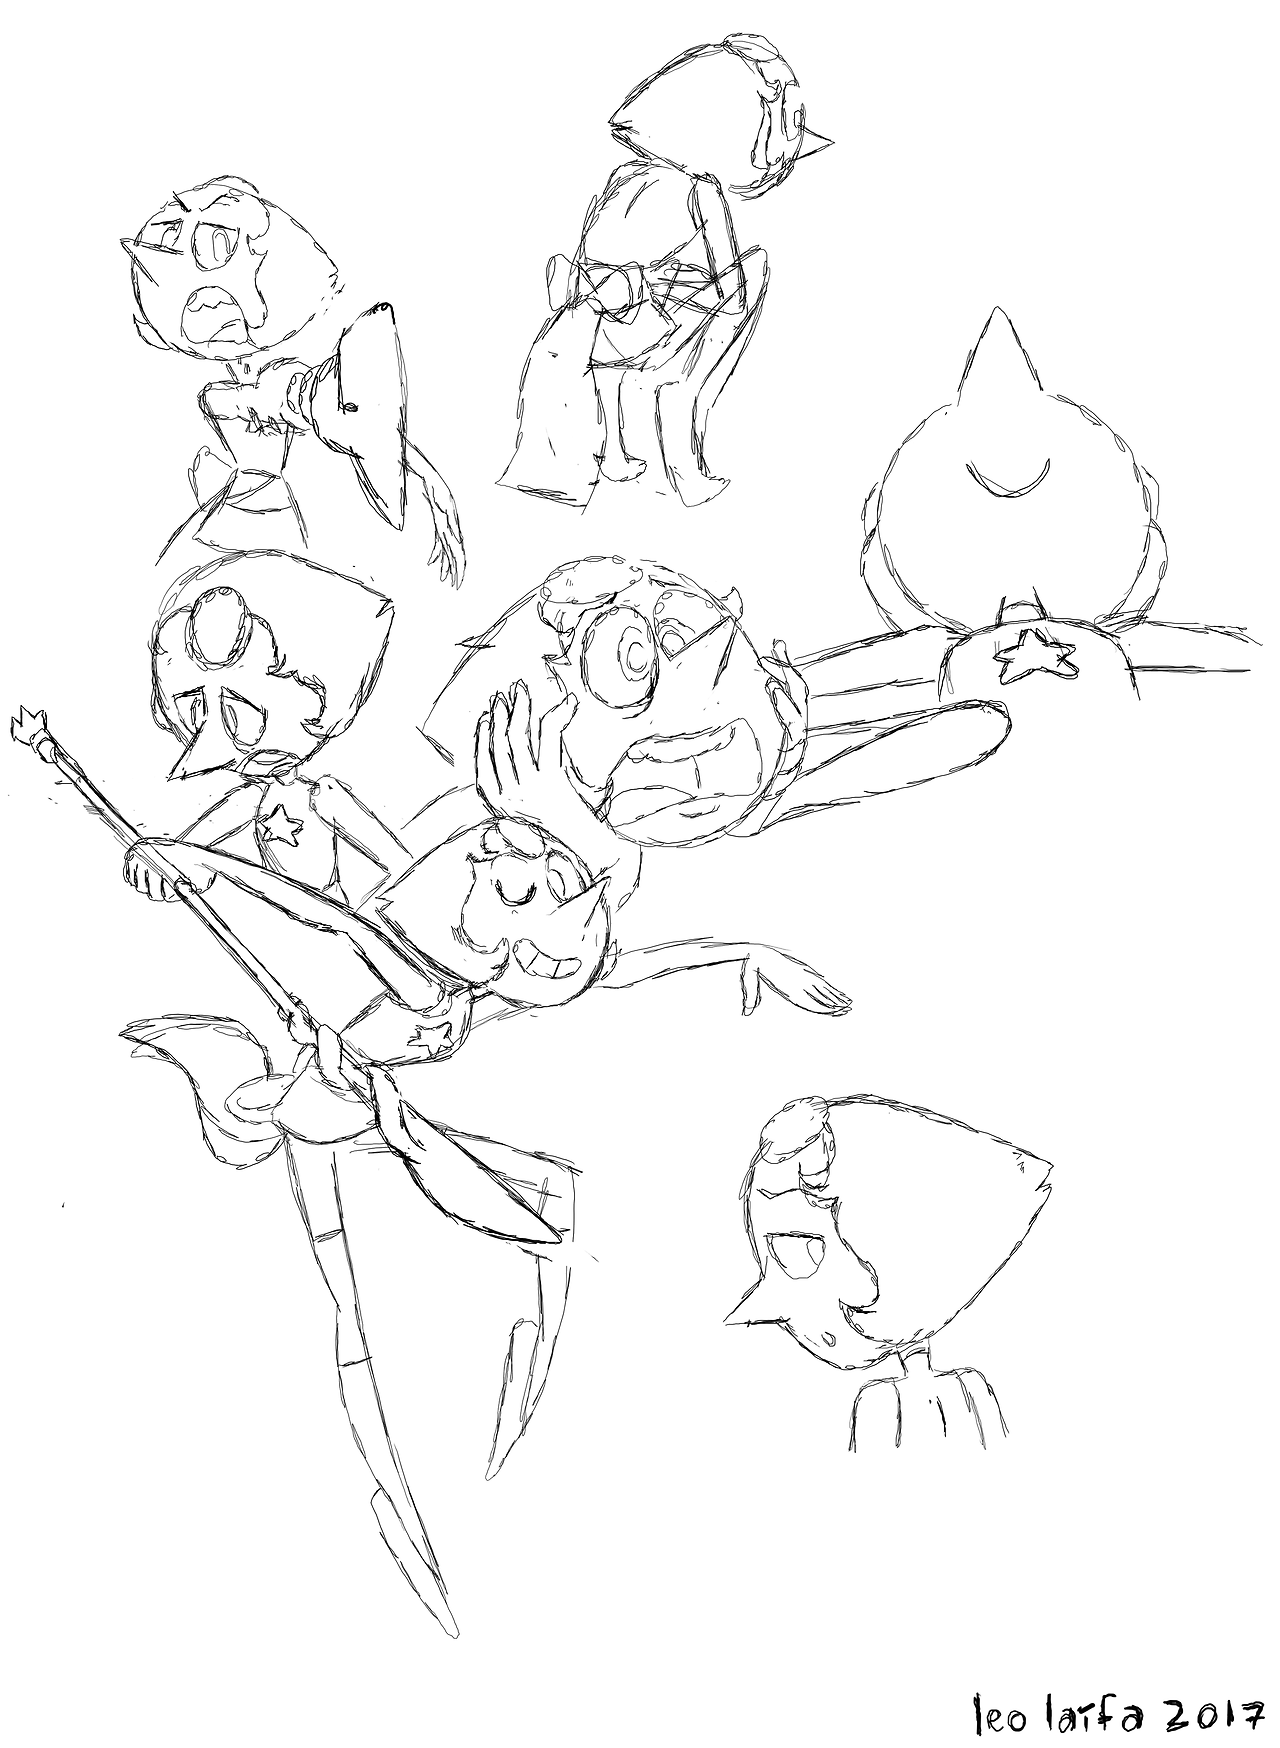 some pearls